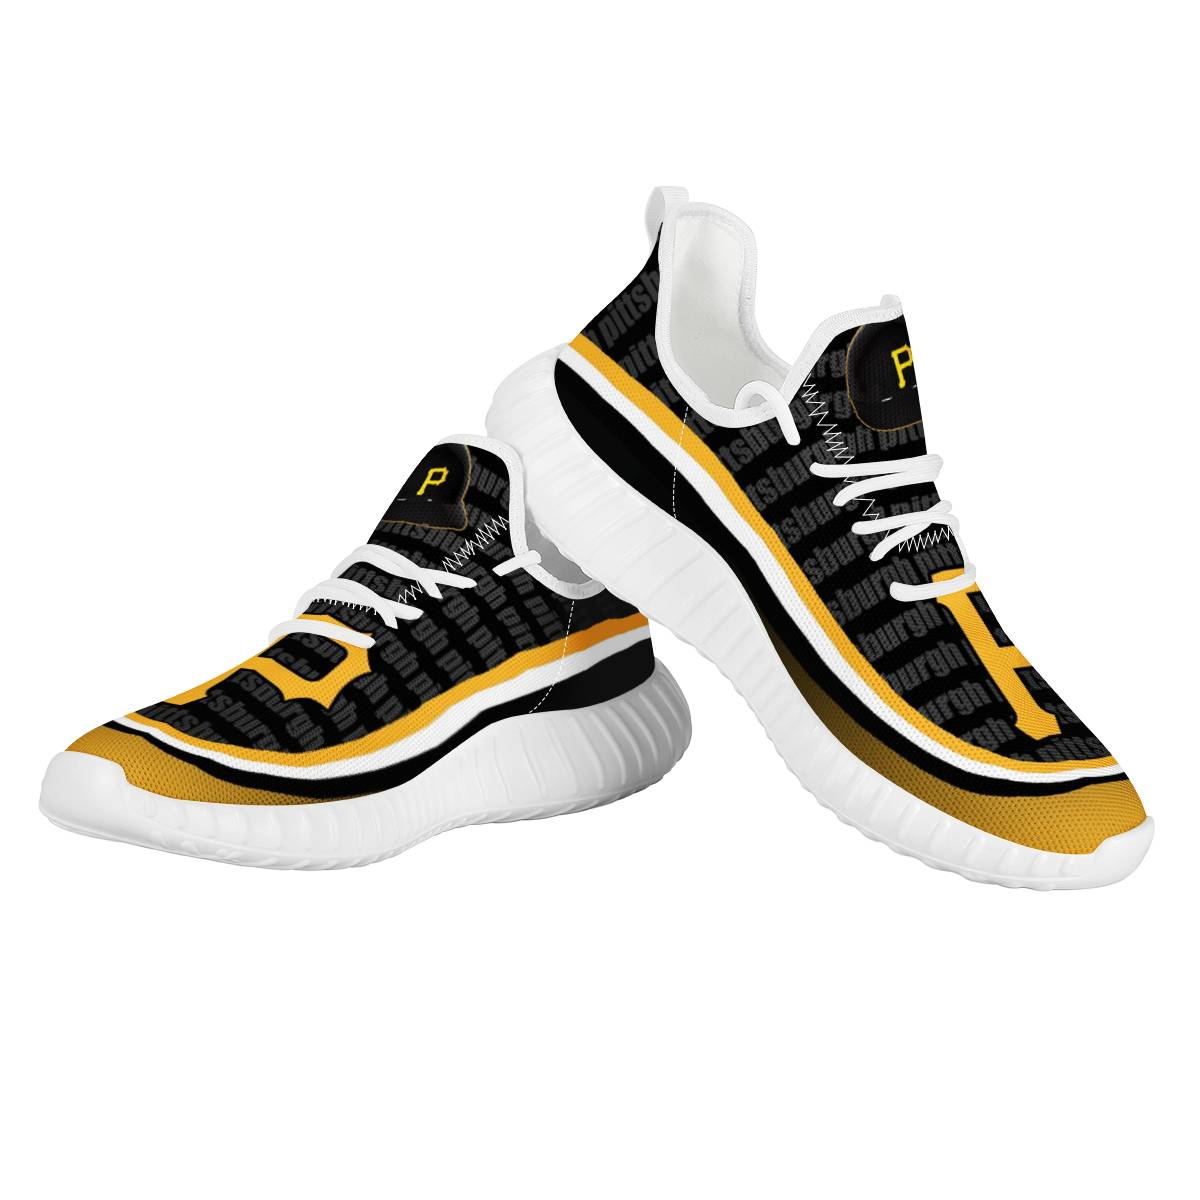 Men's MLB Pittsburgh Pirates Mesh Knit Sneakers/Shoes 001